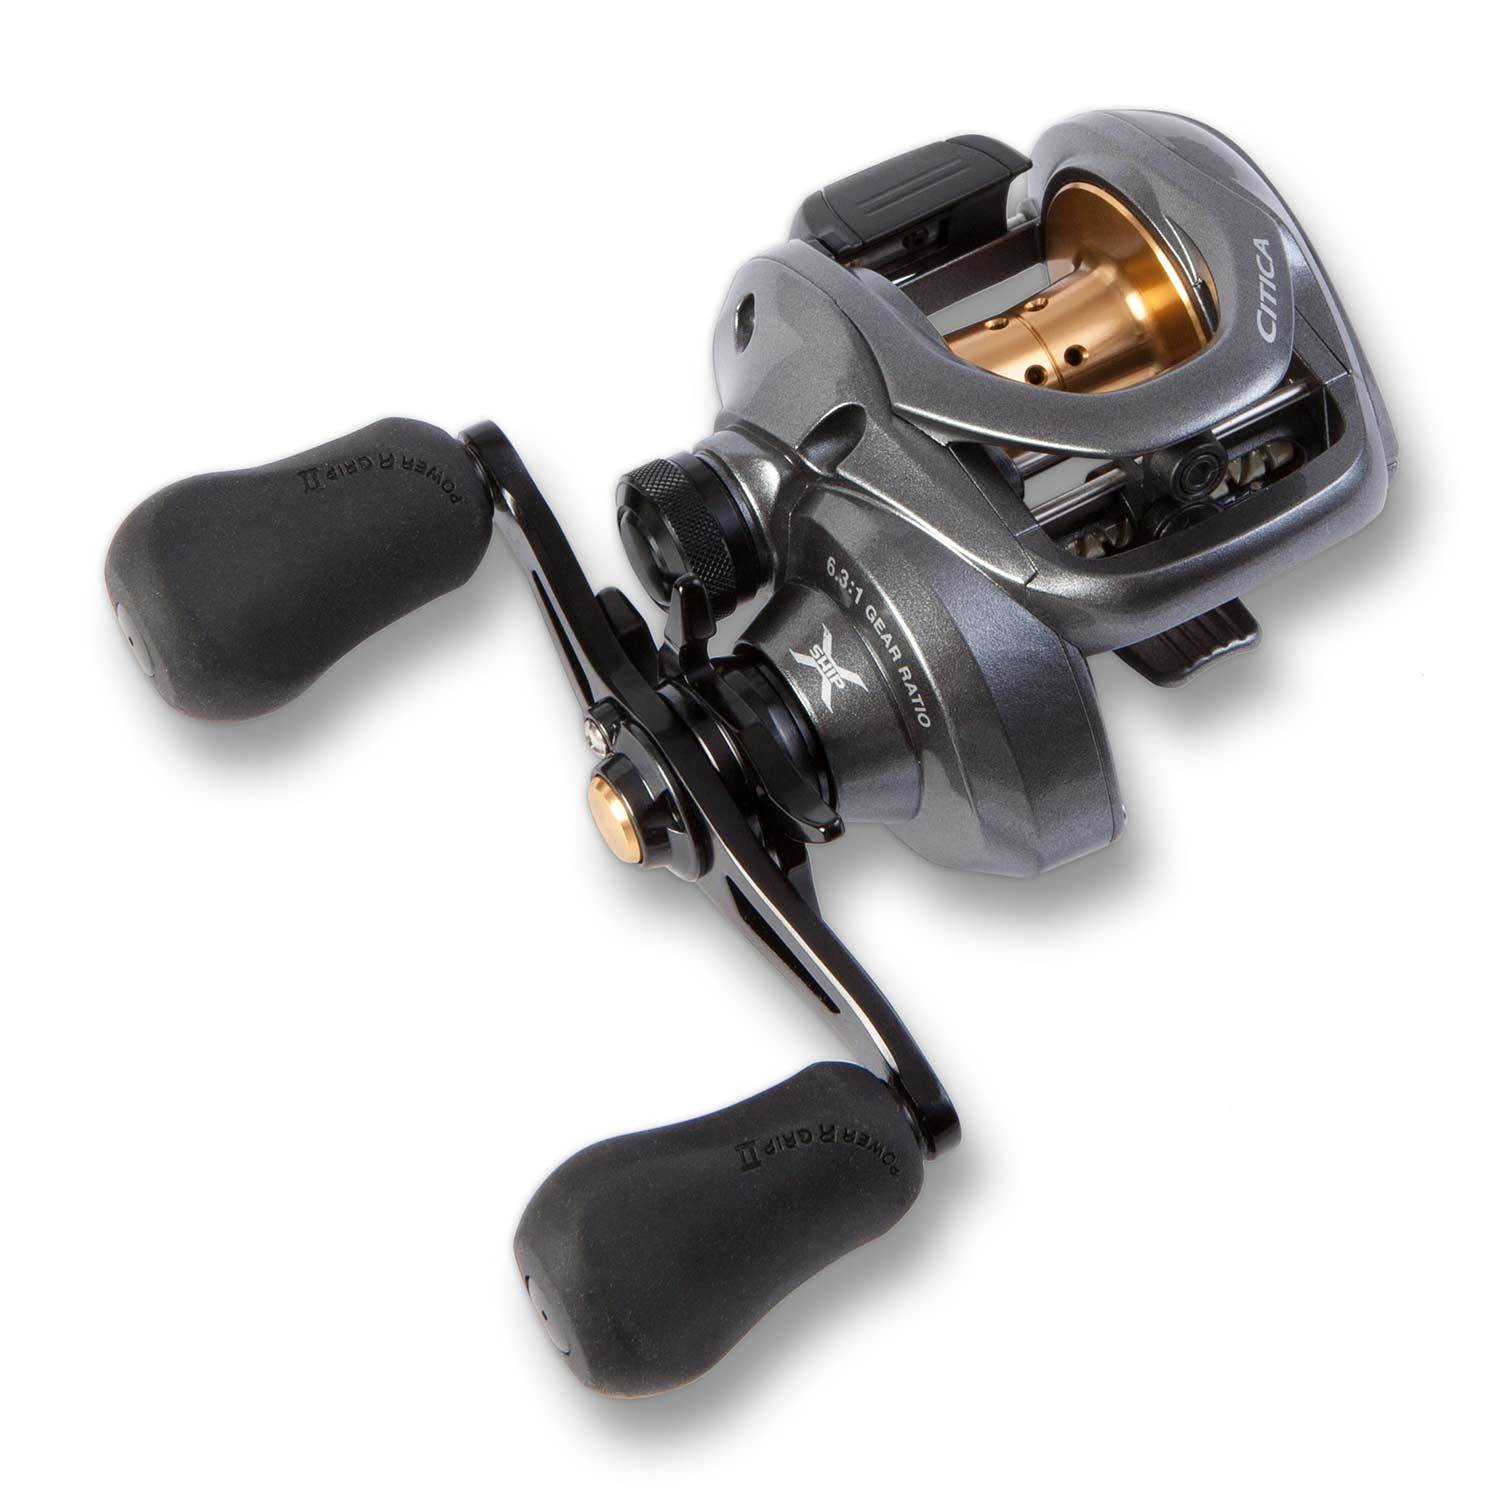 Shimano Citica low profile baitcasting reel how to take apart and service 